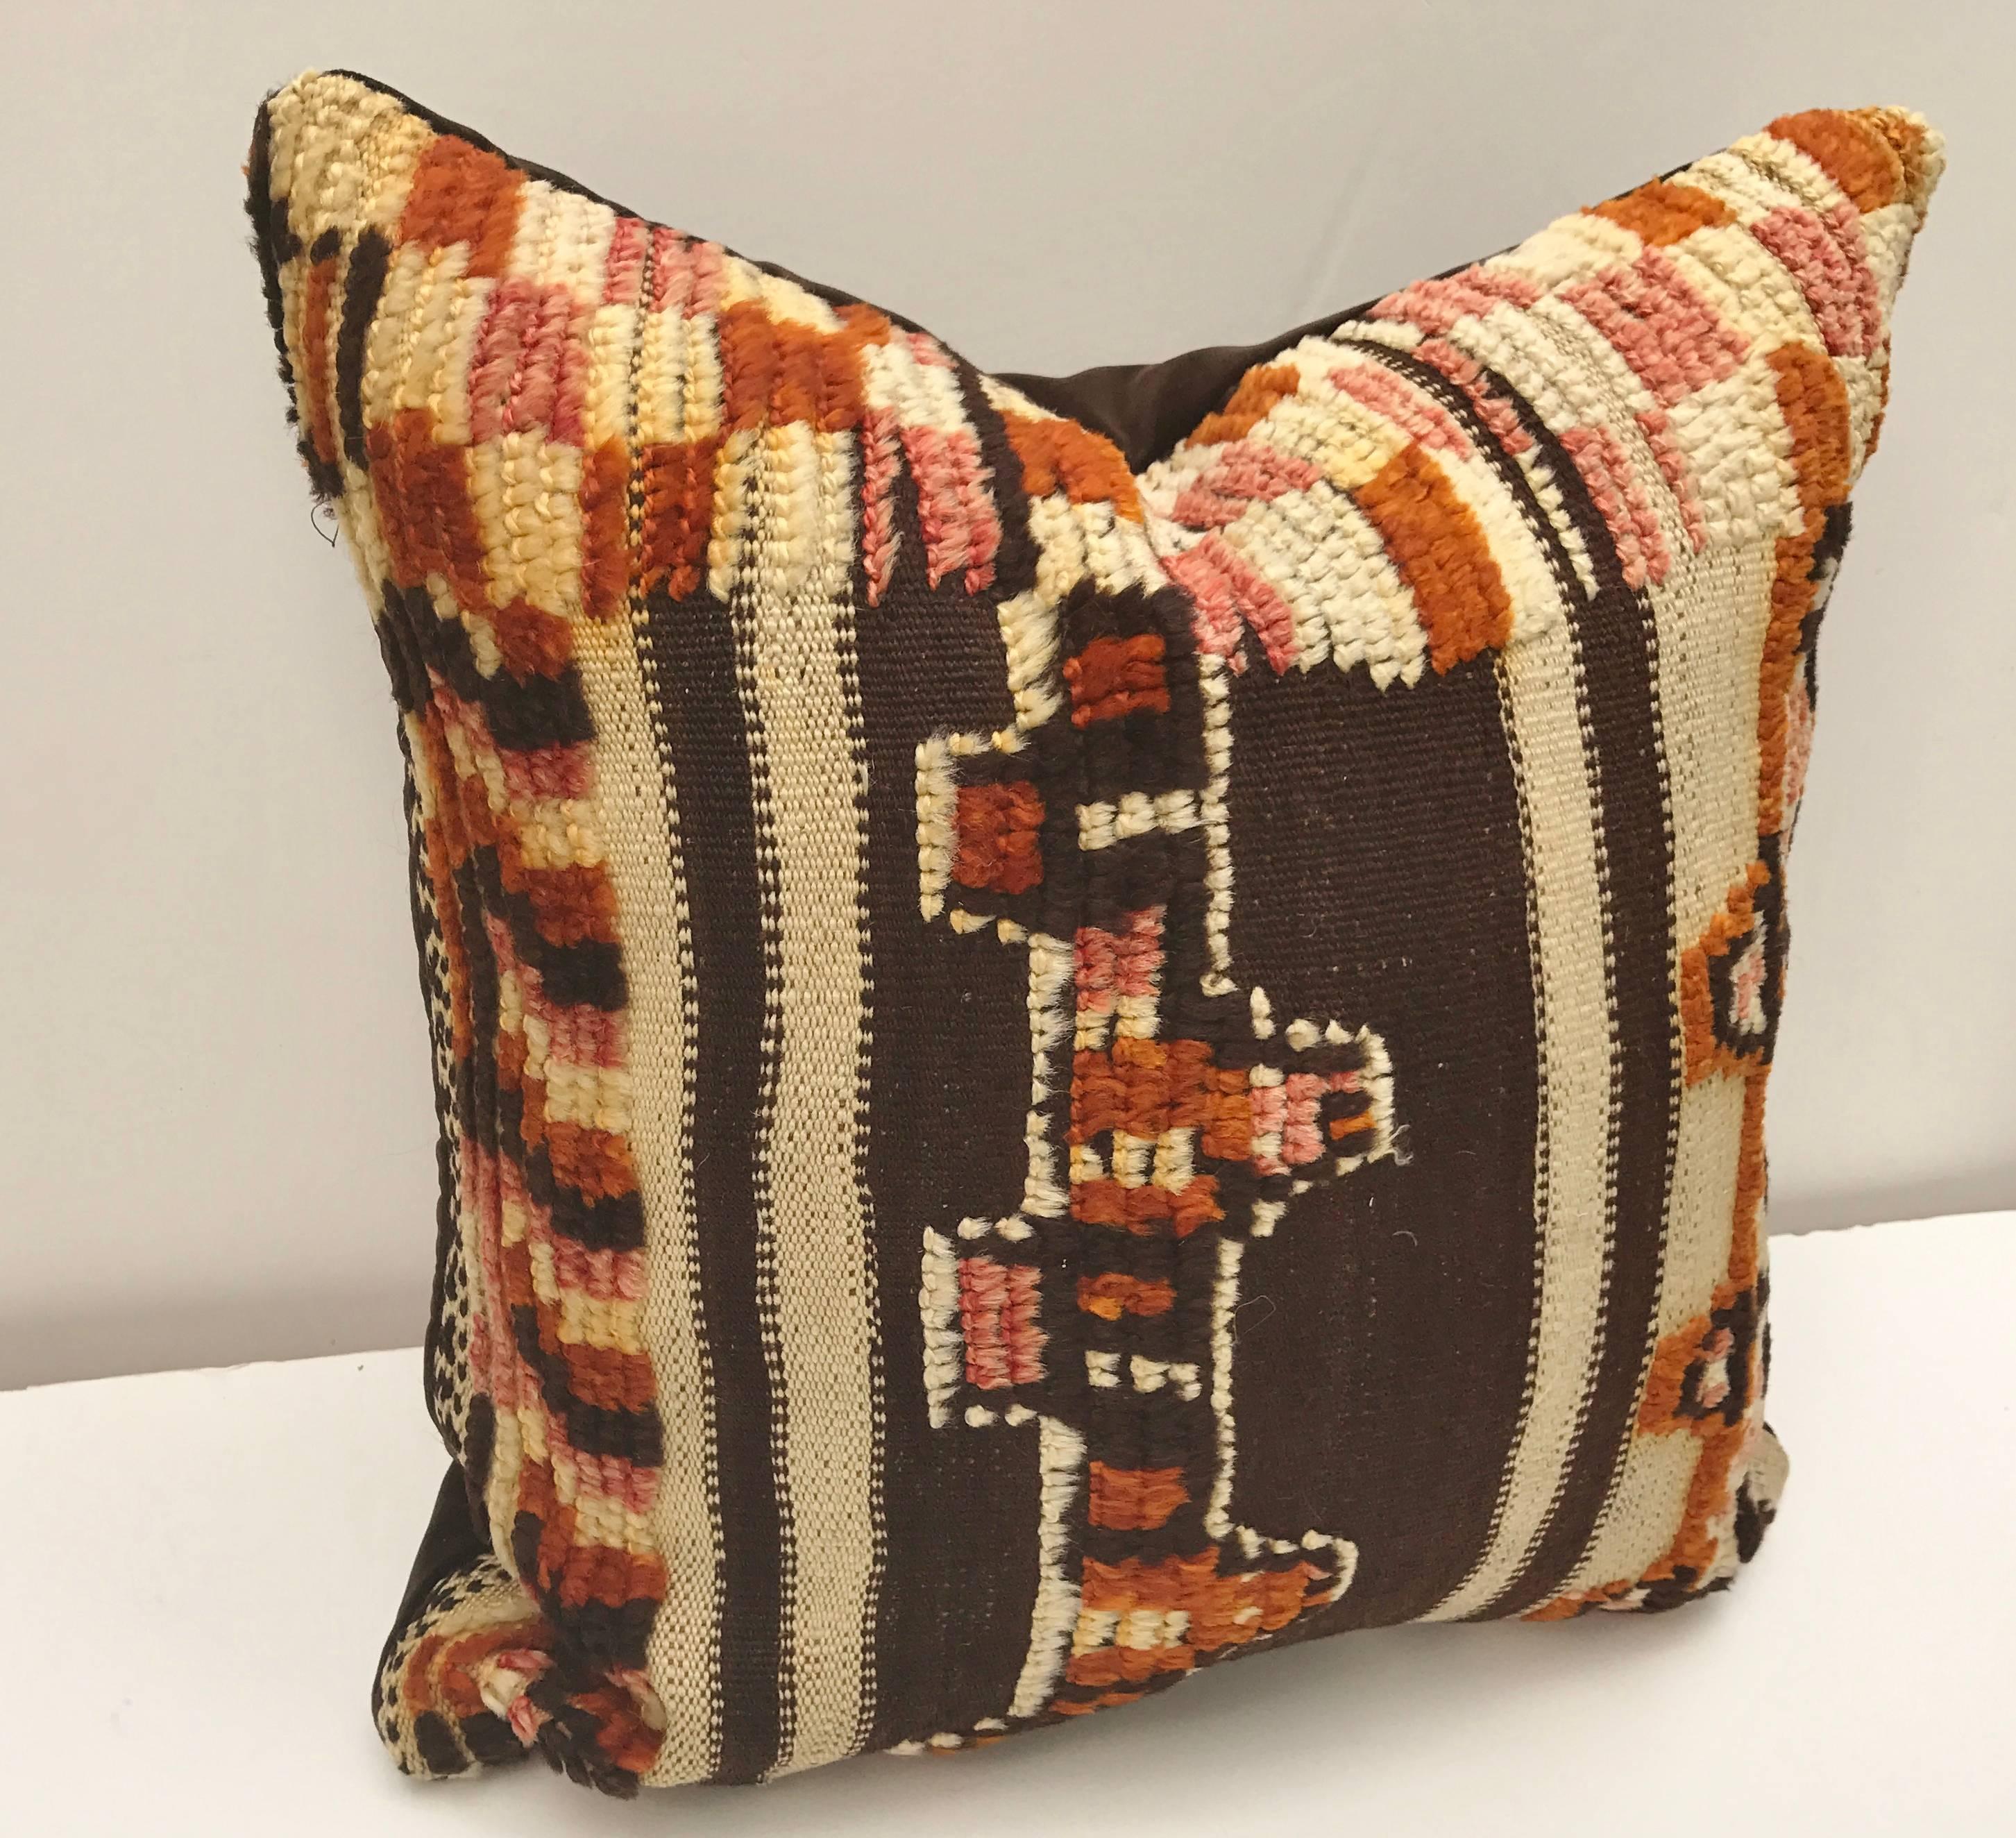 Custom pillow cut from a vintage hand loomed wool Moroccan Berber rug from the Atlas Mountains. Wool is soft and lustrous with good color. Flat-weave stripes are embellished with tufted tribal designs. Pillow is backed in dark brown velvet, filled